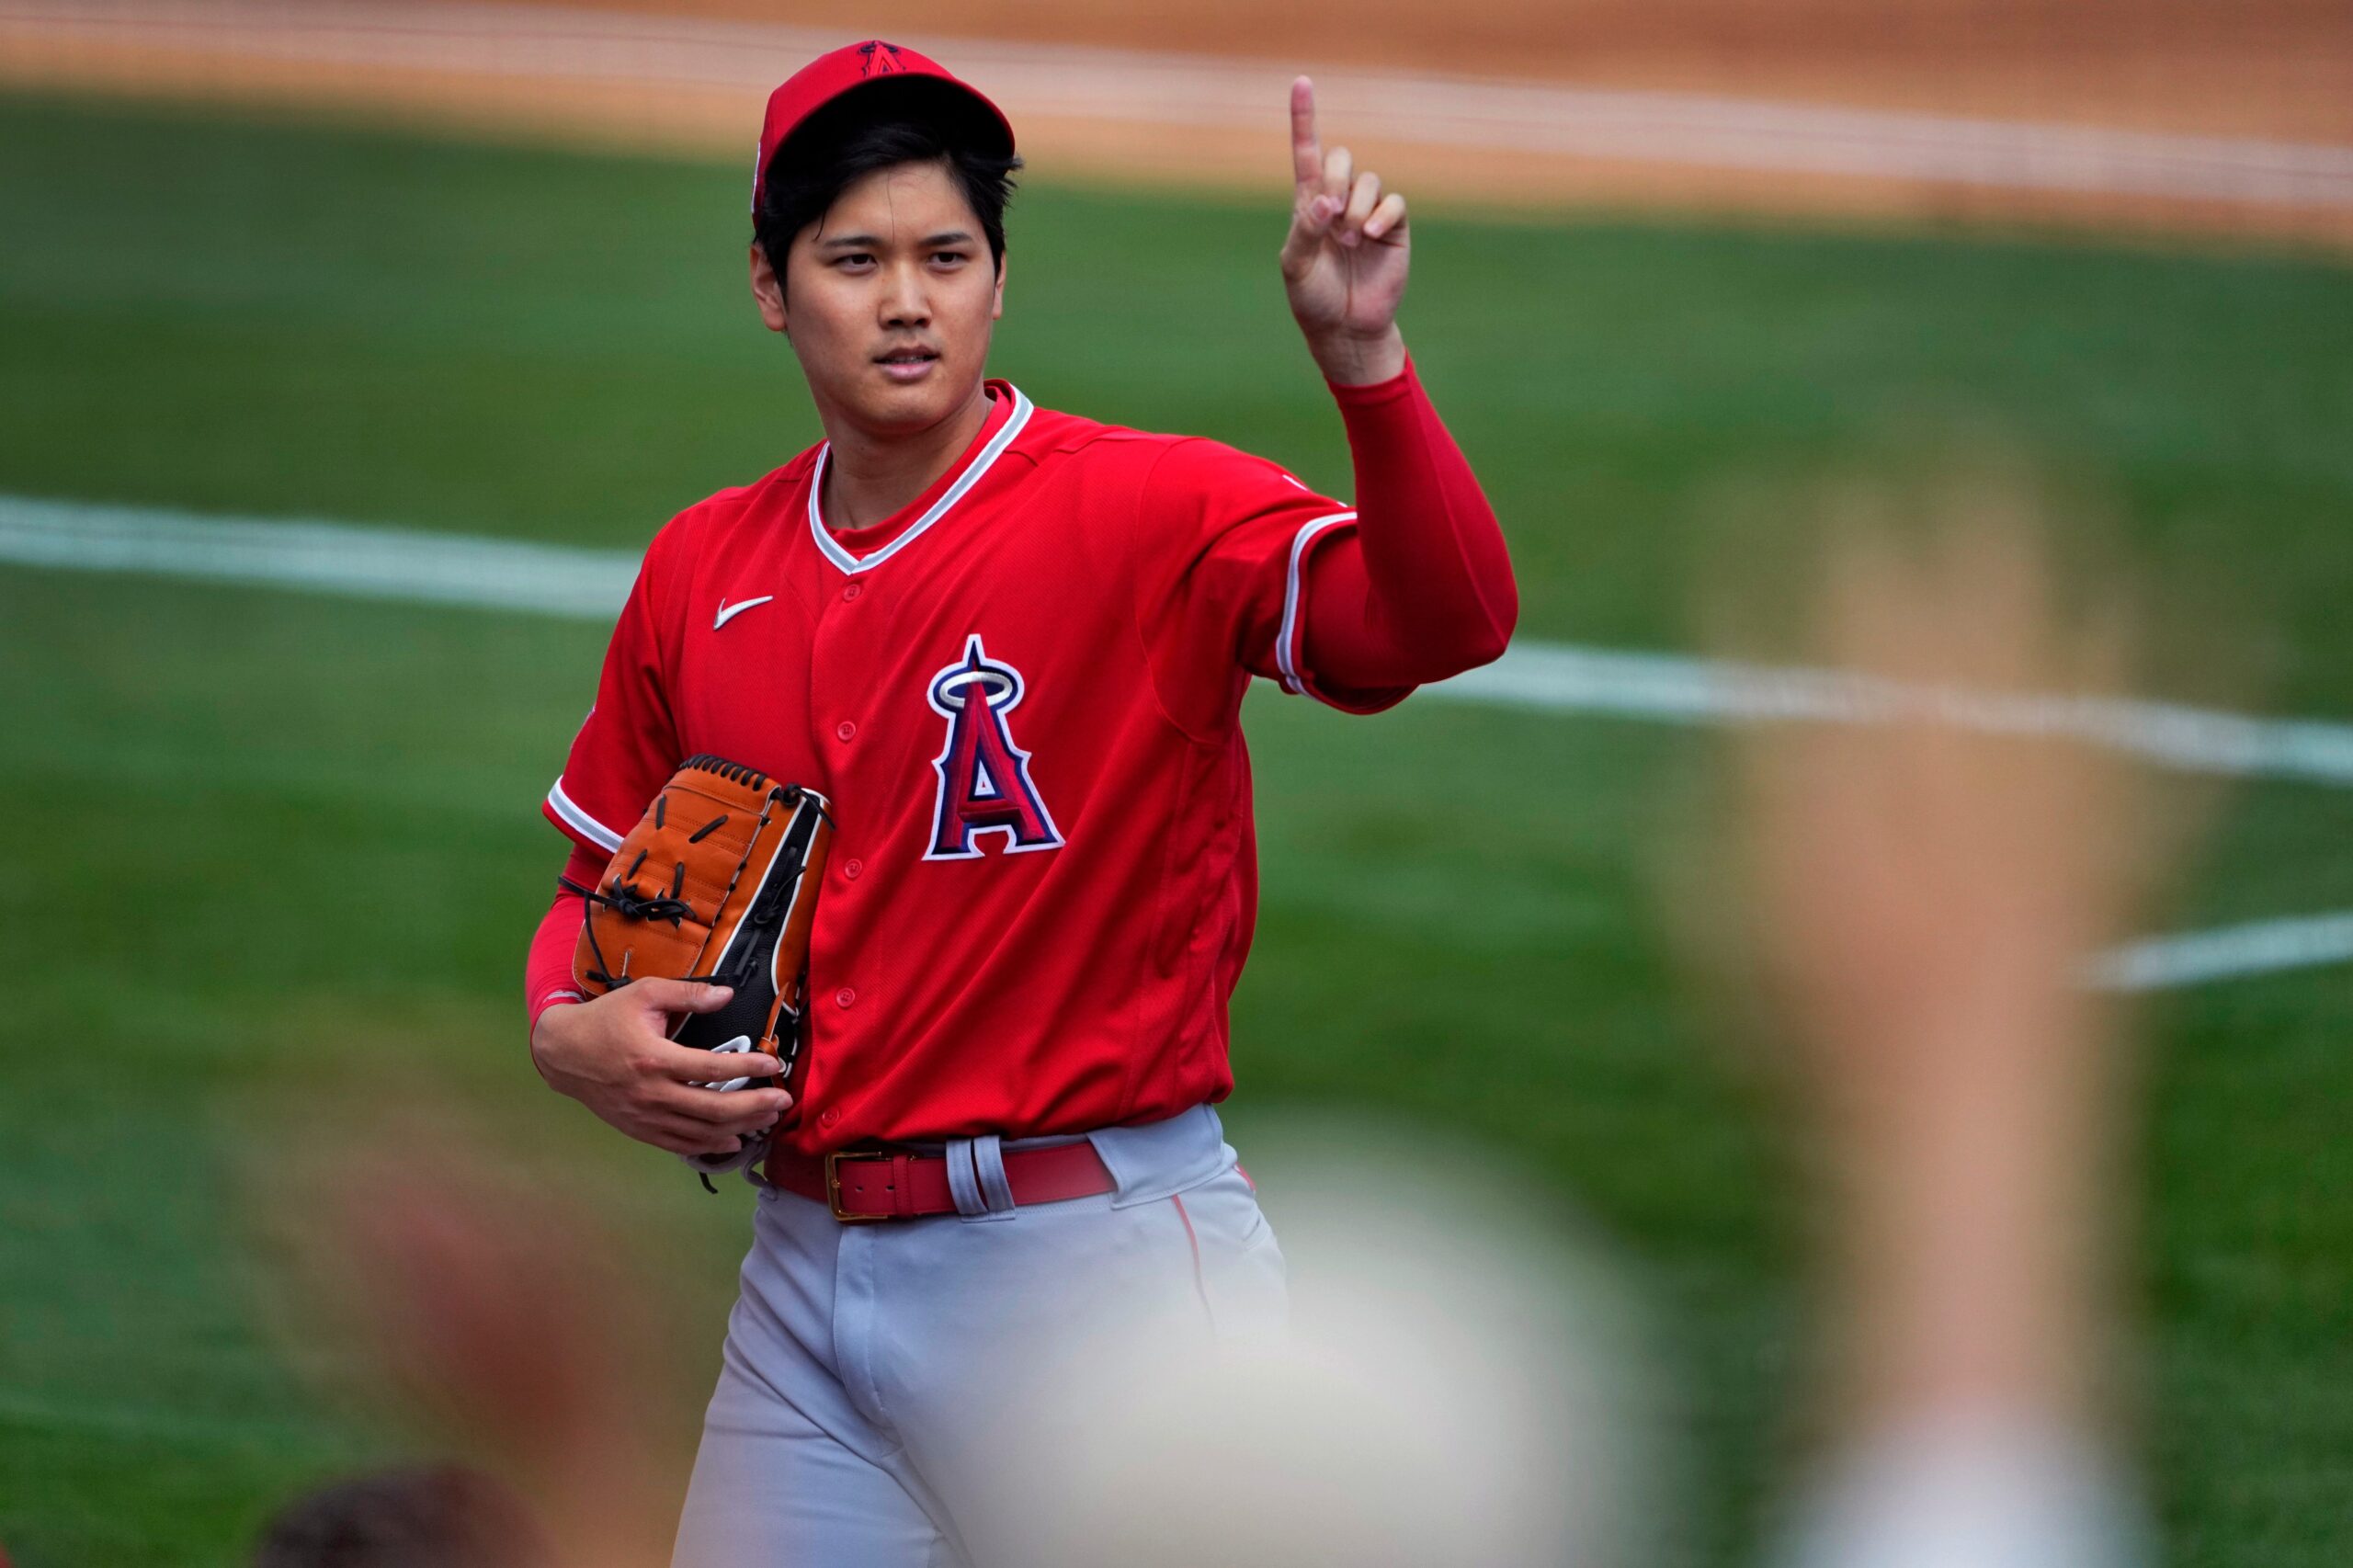 Shohei Ohtani will play for Japan in the World Baseball Classic.